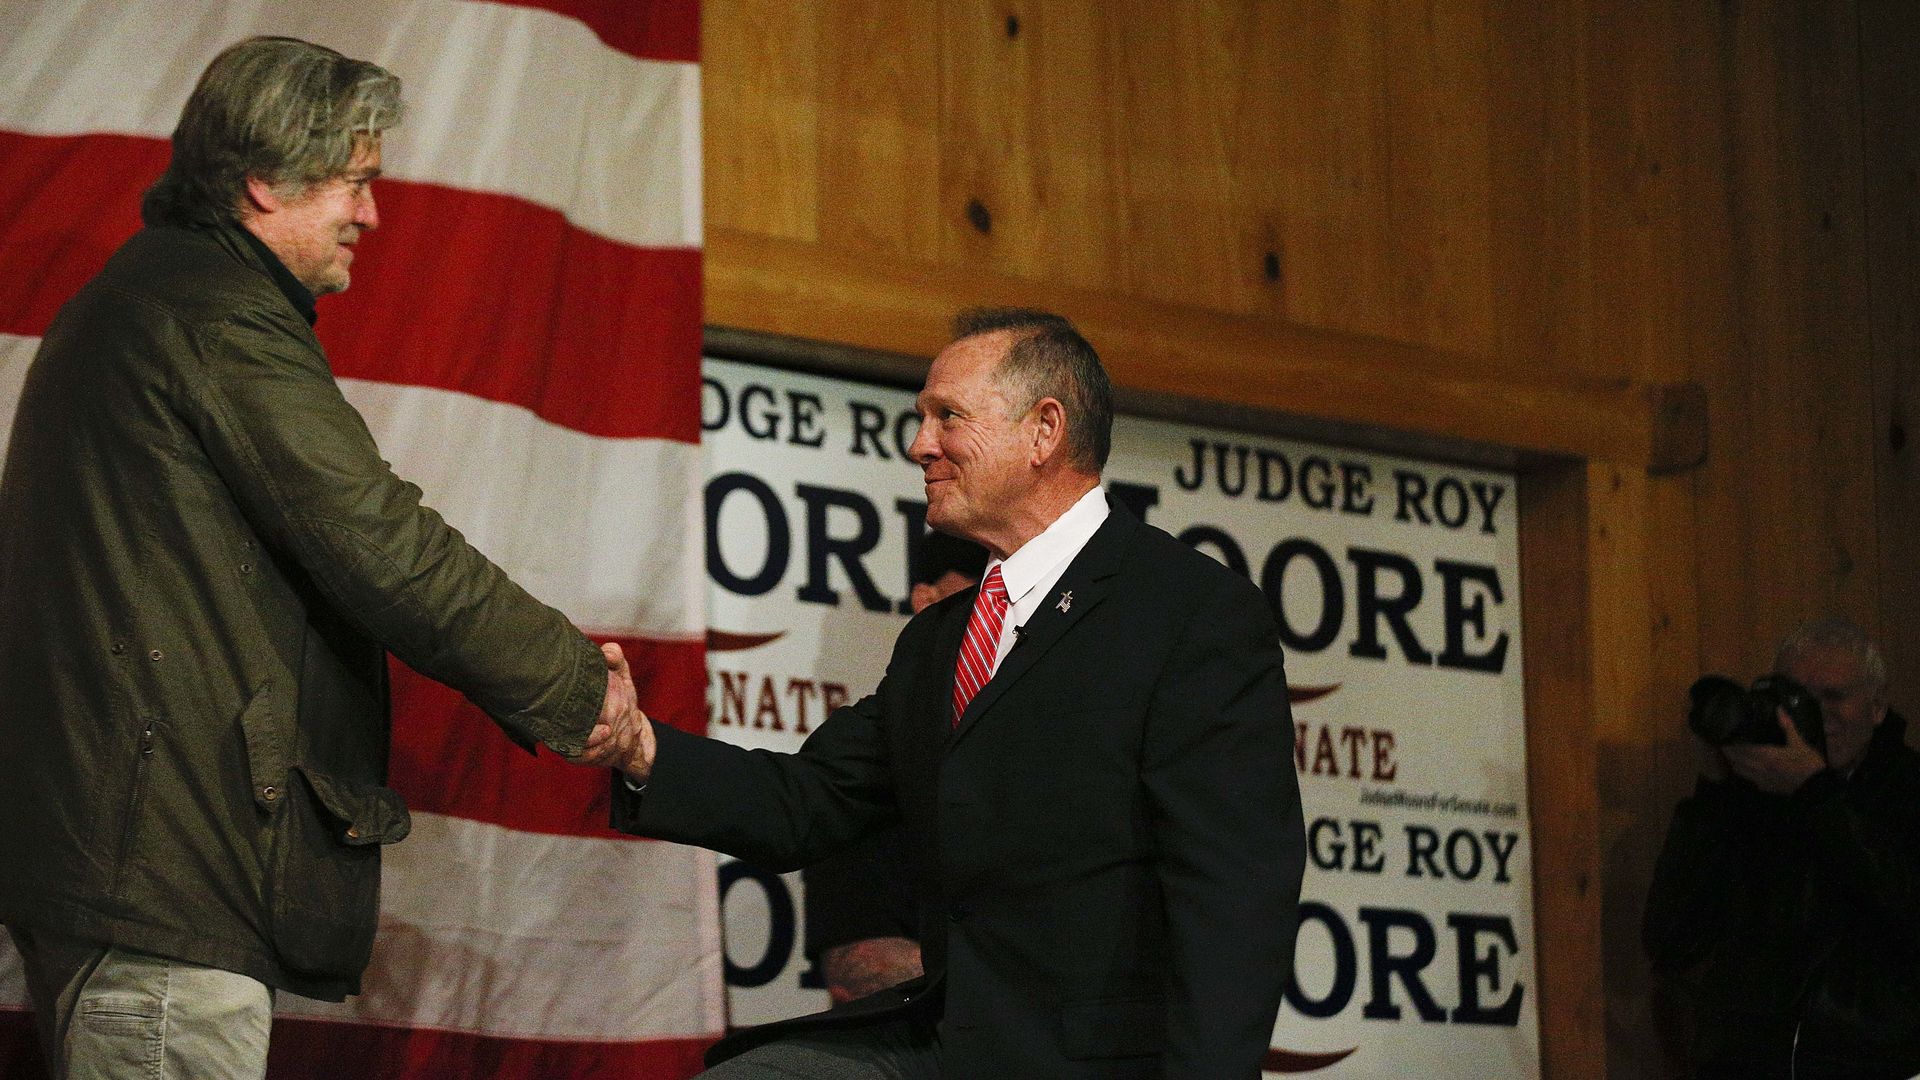 Steve Bannon introduces U.S. Senate candidate Roy Moore at a rally.